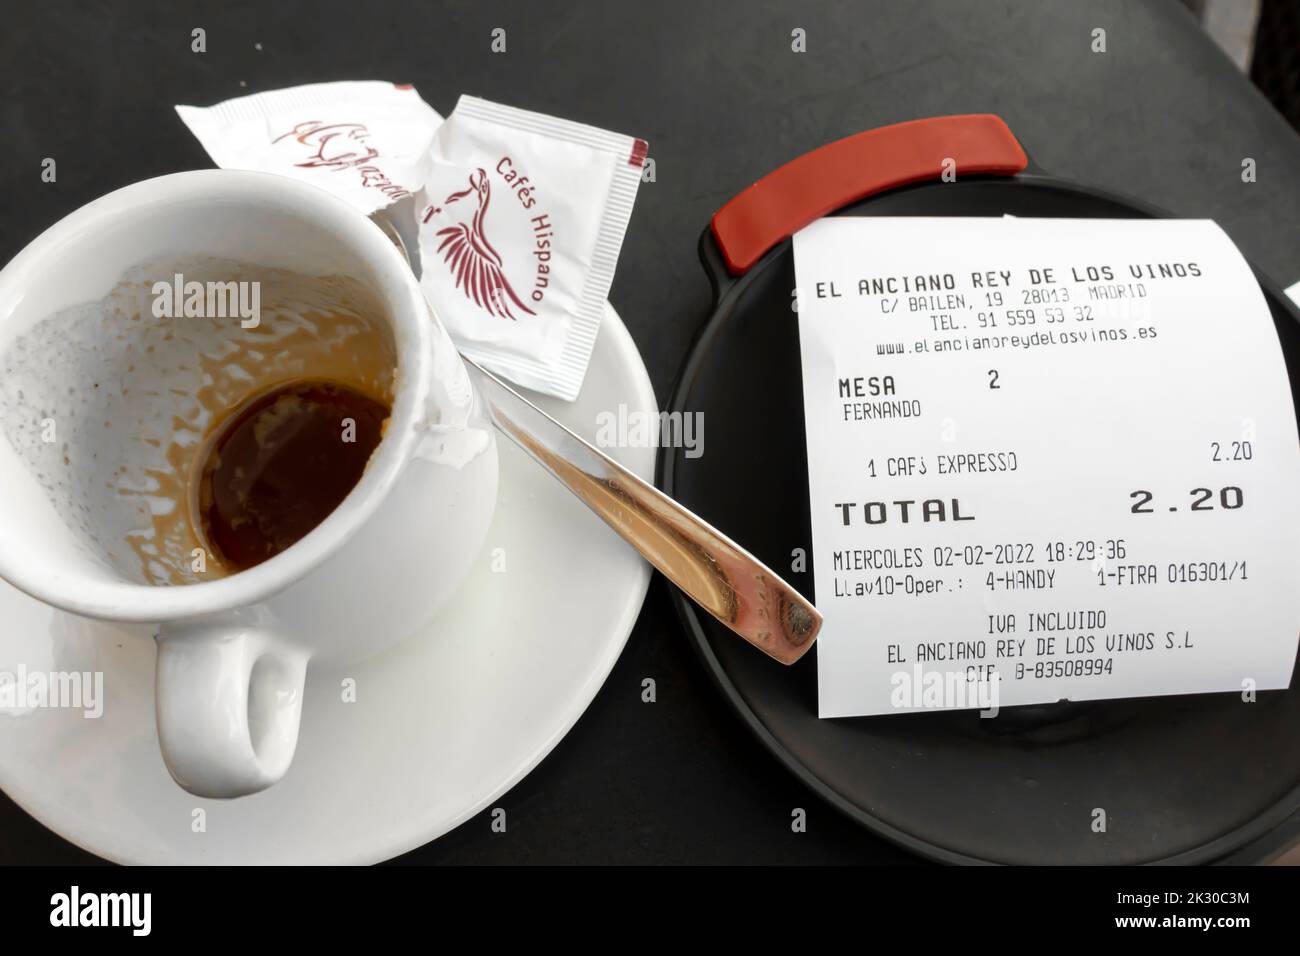 Coffee espresso cup just emptied with a receipt for it totaling EURO 2.20. El Anciano Rey cafeteria, Madrid, Spain Stock Photo